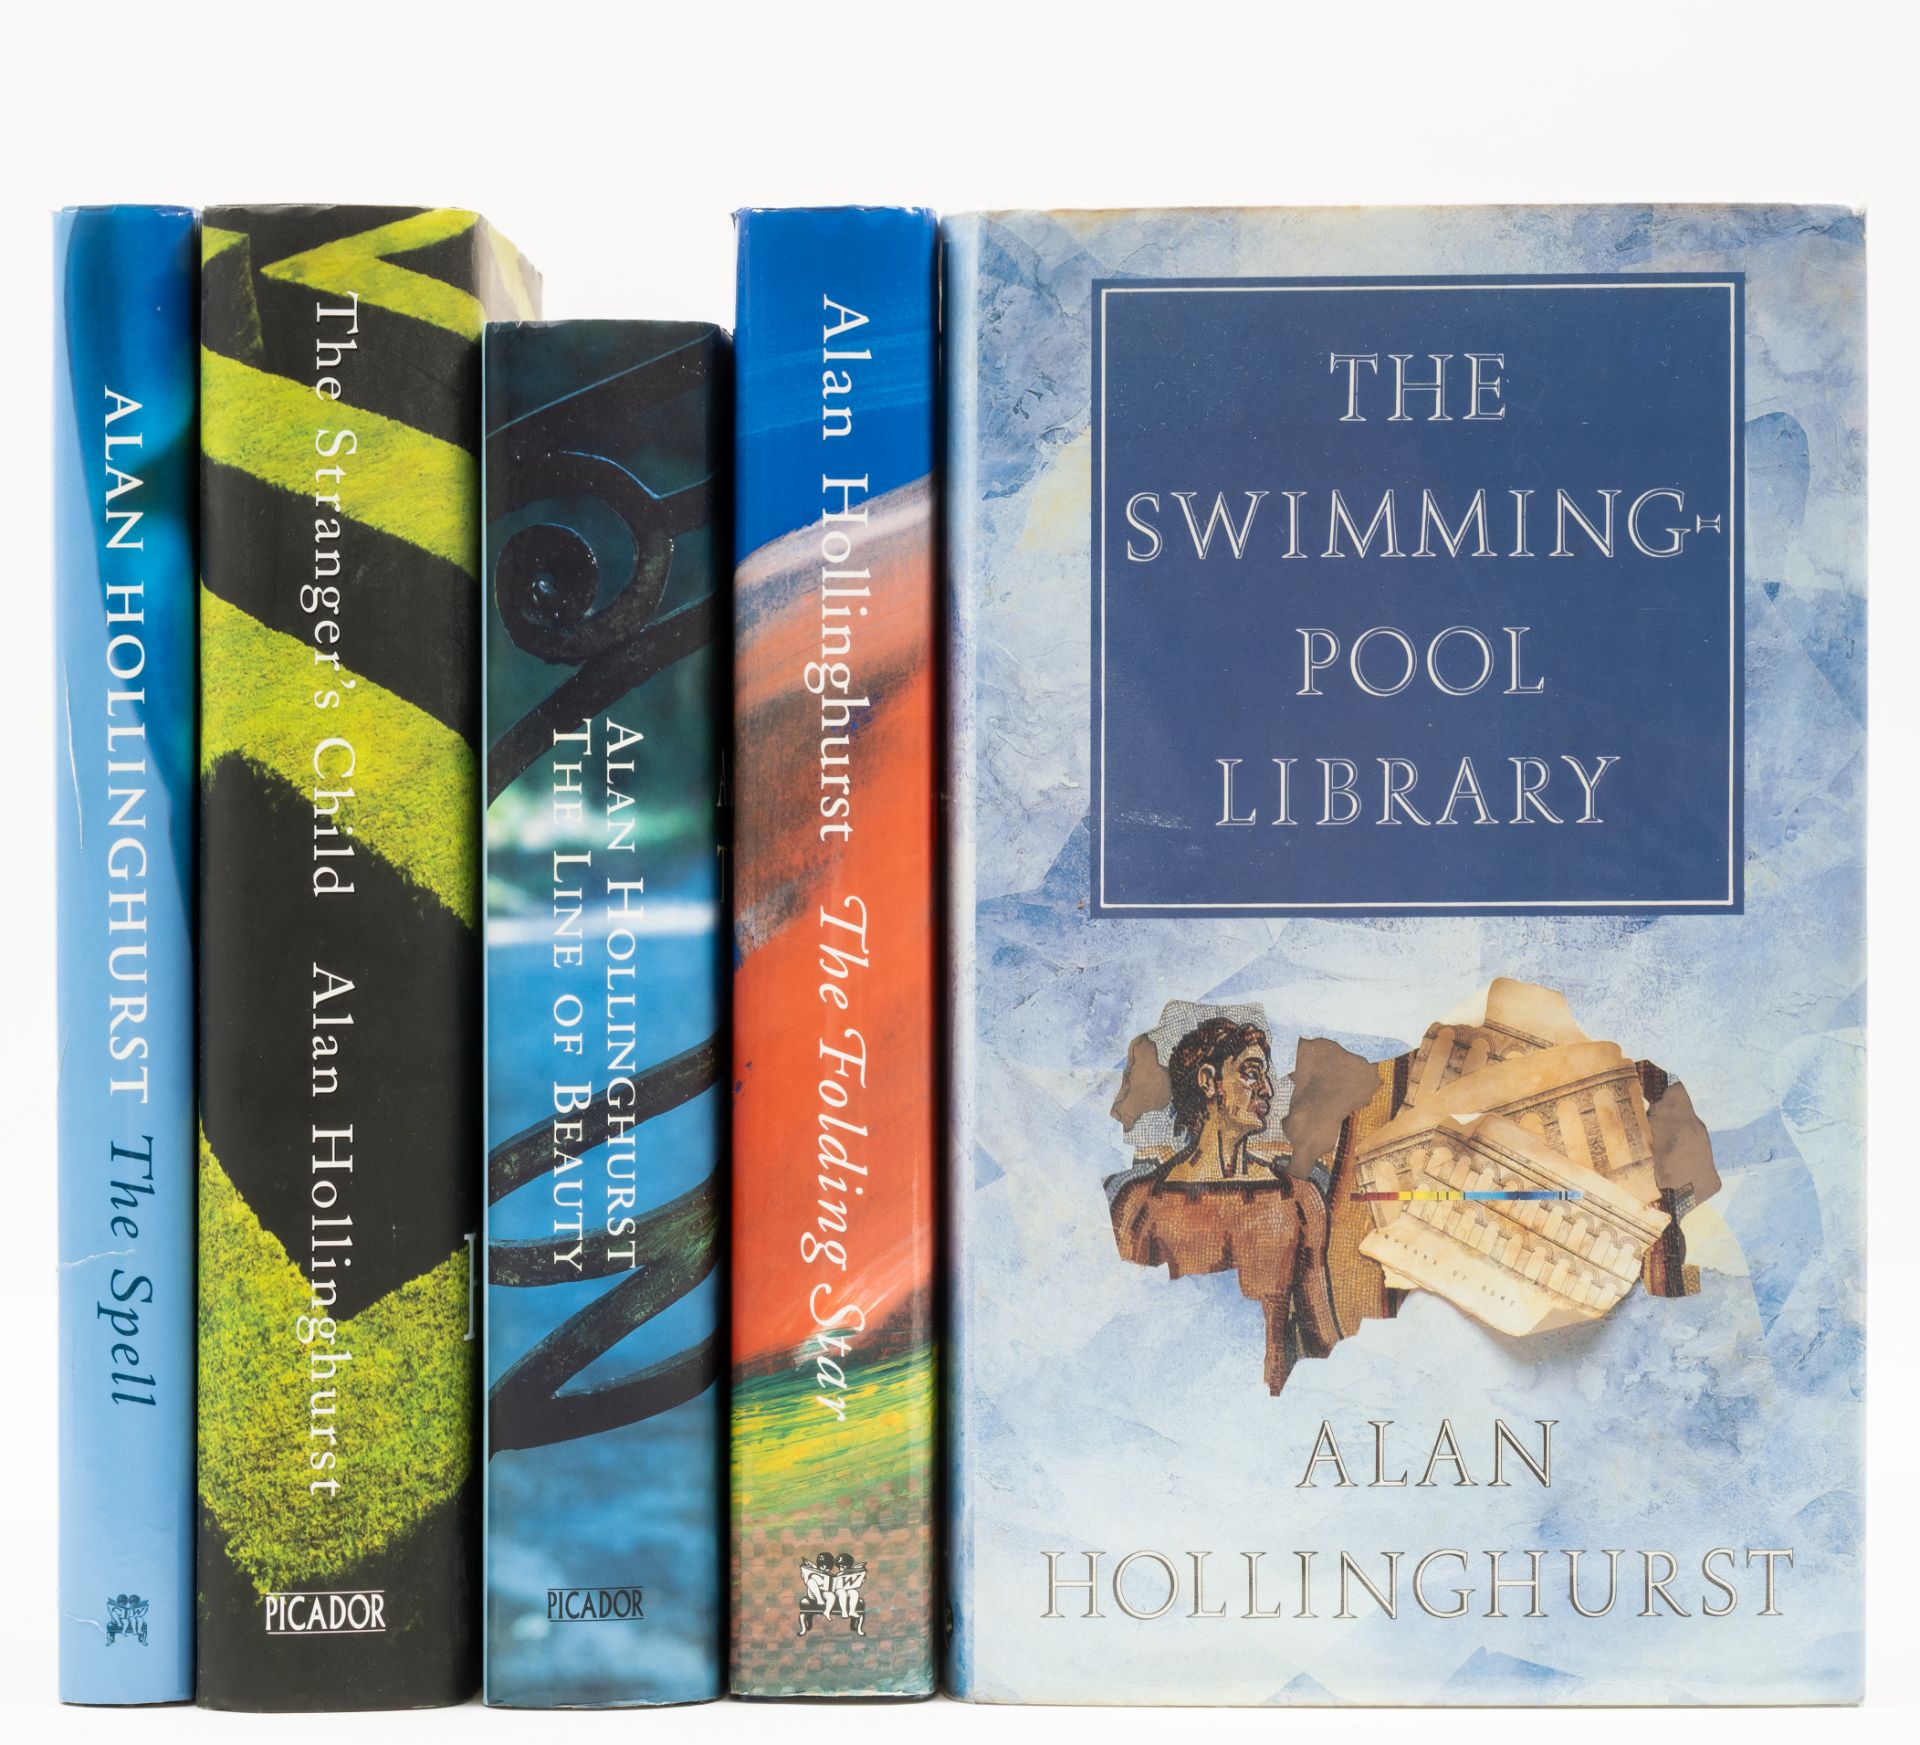 Hollinghurst (Alan) The Swimming Pool Library, first edition, 1988 & 4 others by the same, one si...